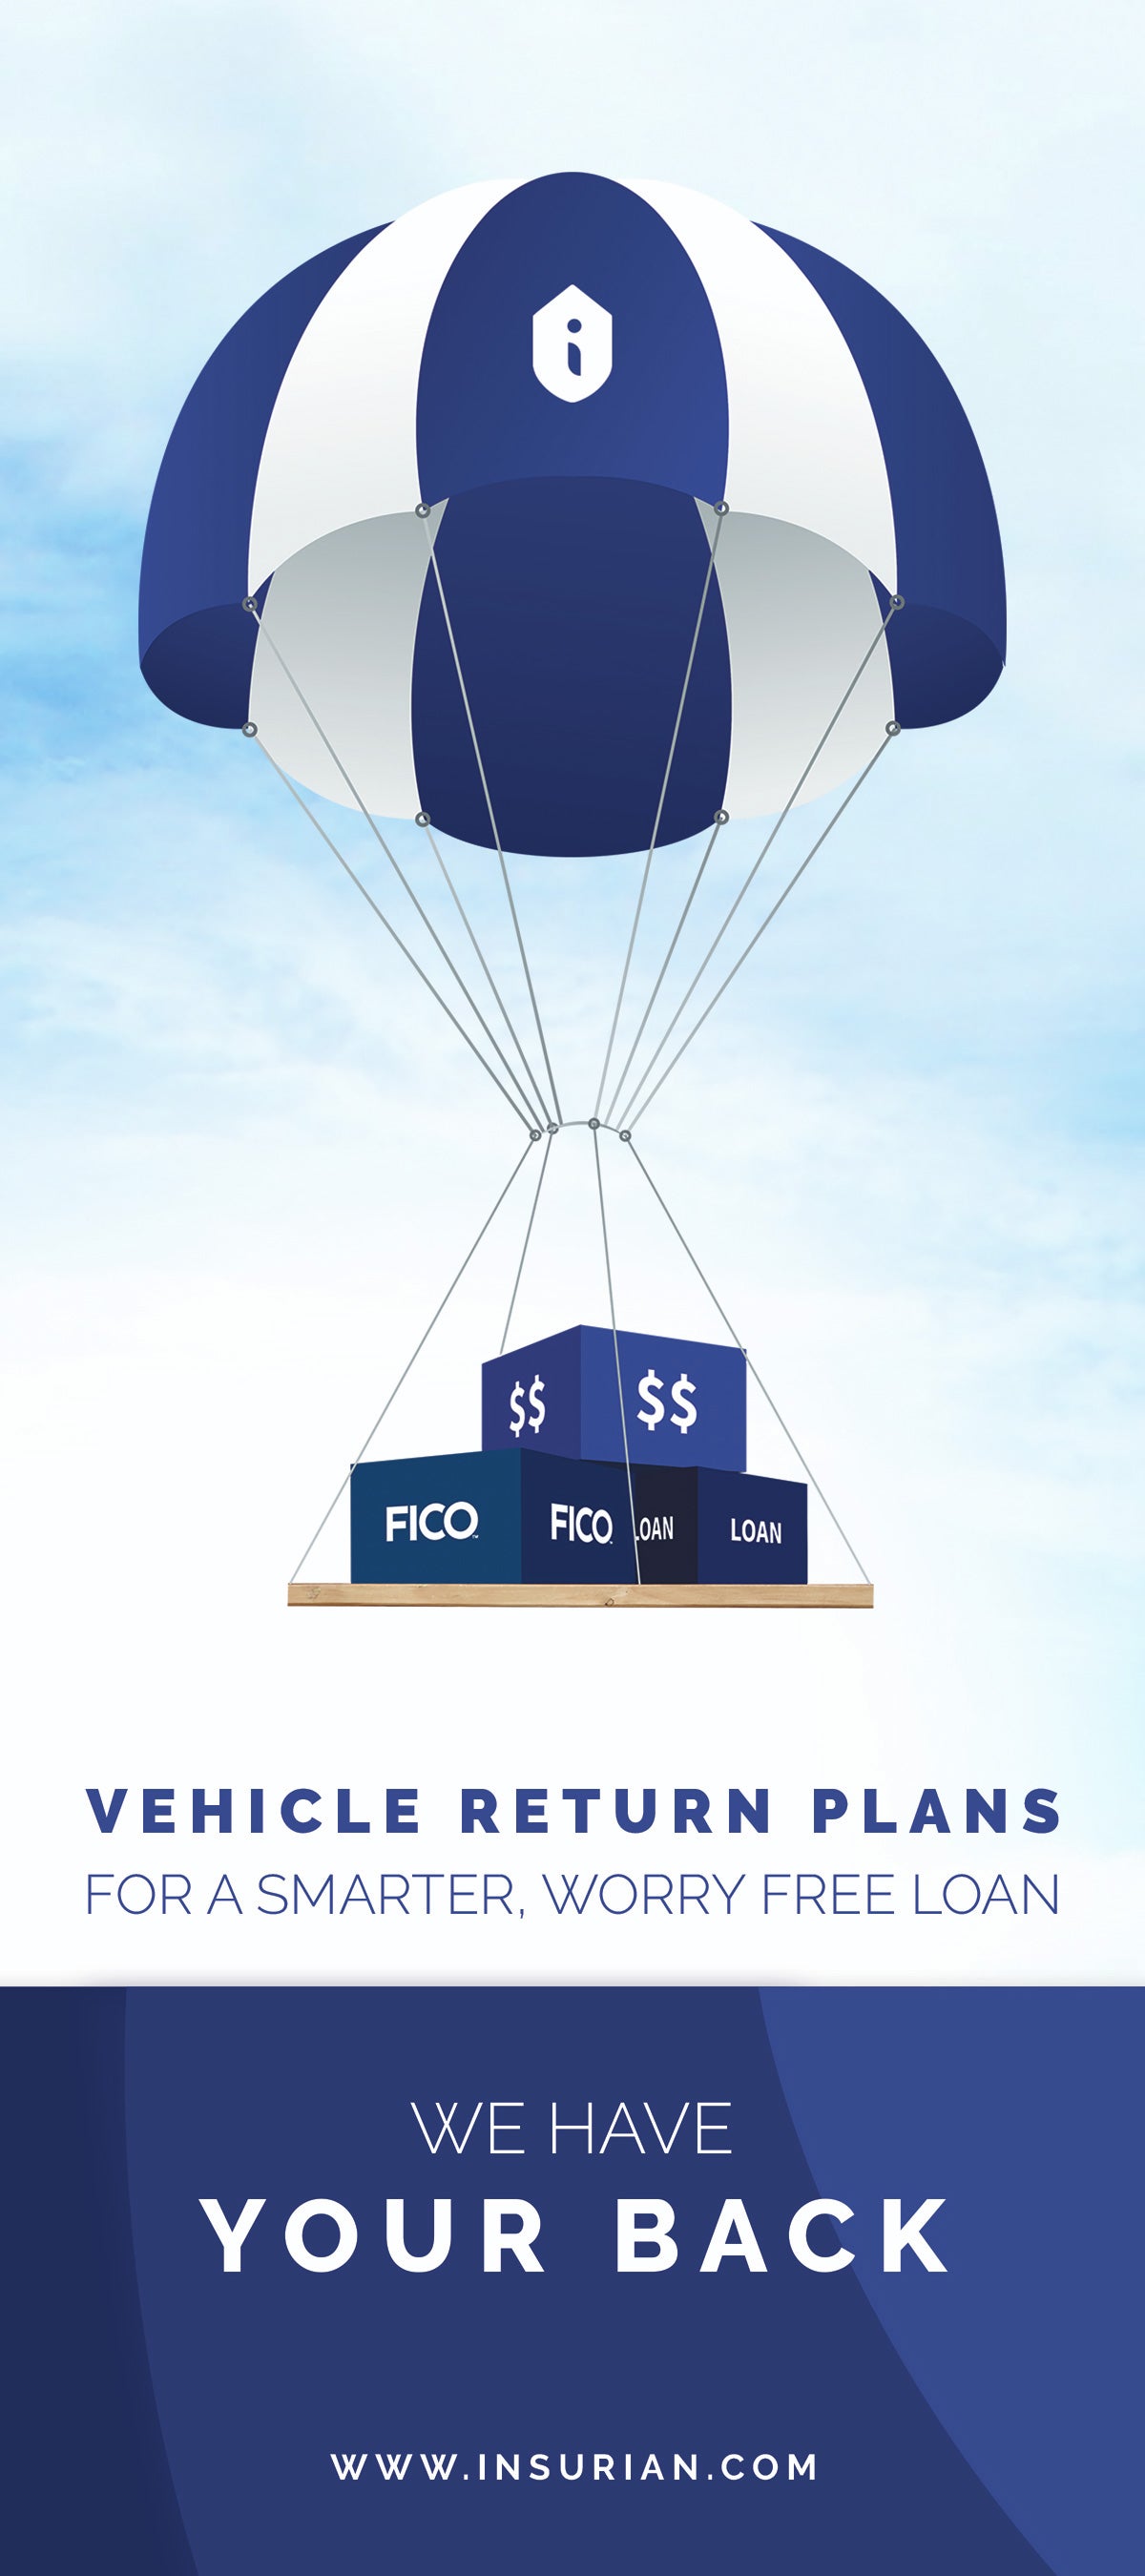 Insurian Vehicle Return Plans For A Smarter, Worry Free Loan